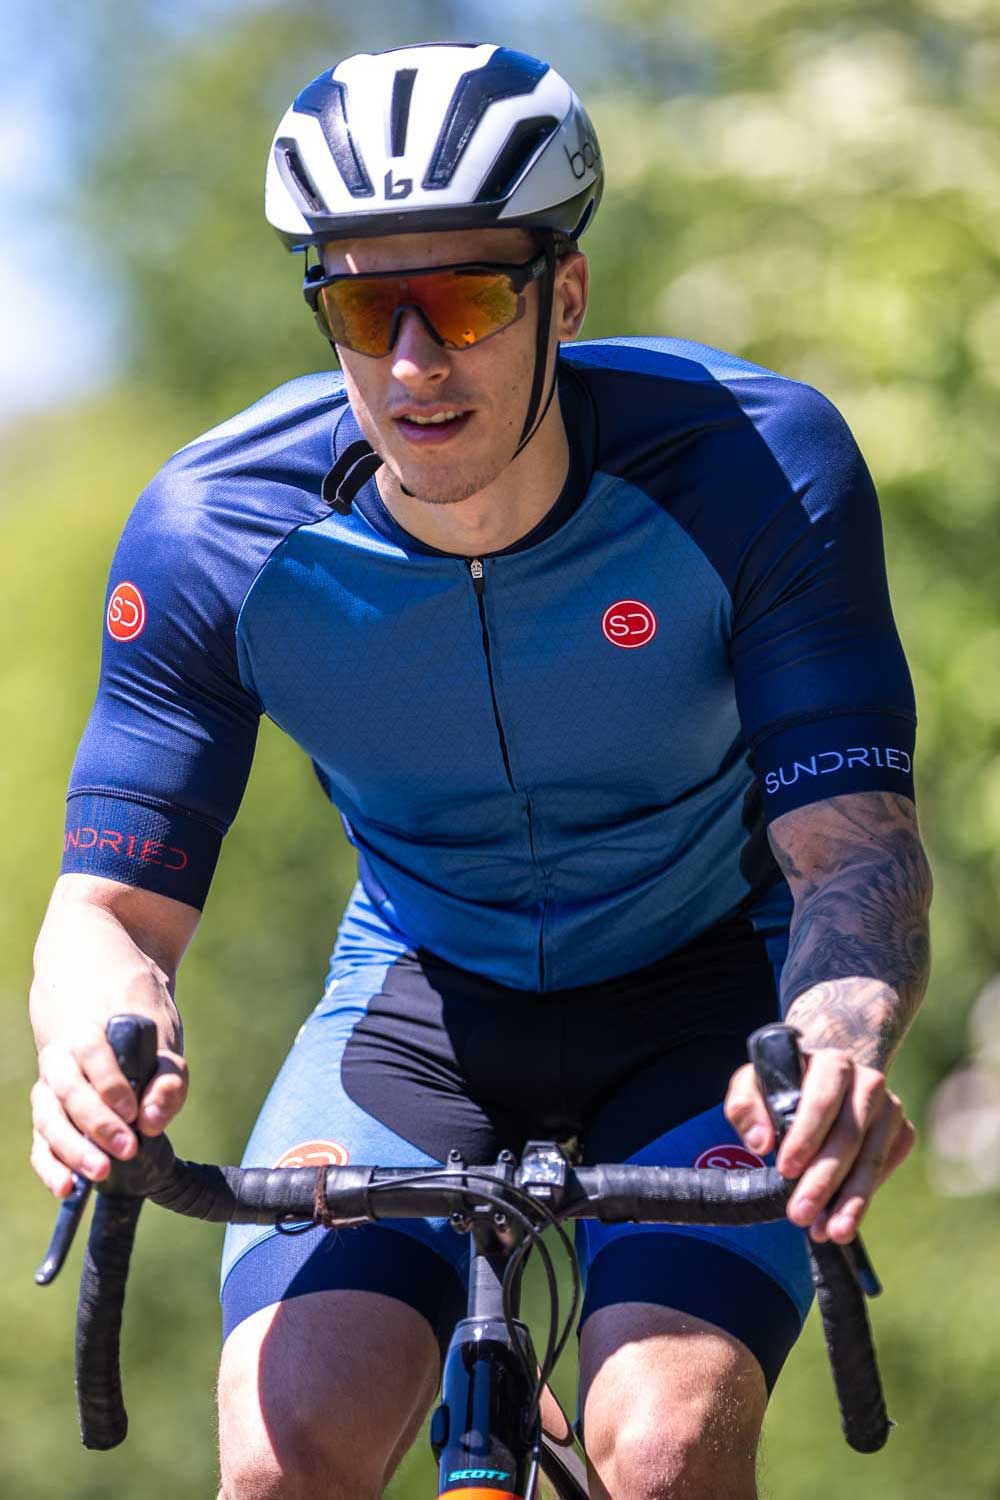 Sundried Men's Cycle Clothing and Accessories 